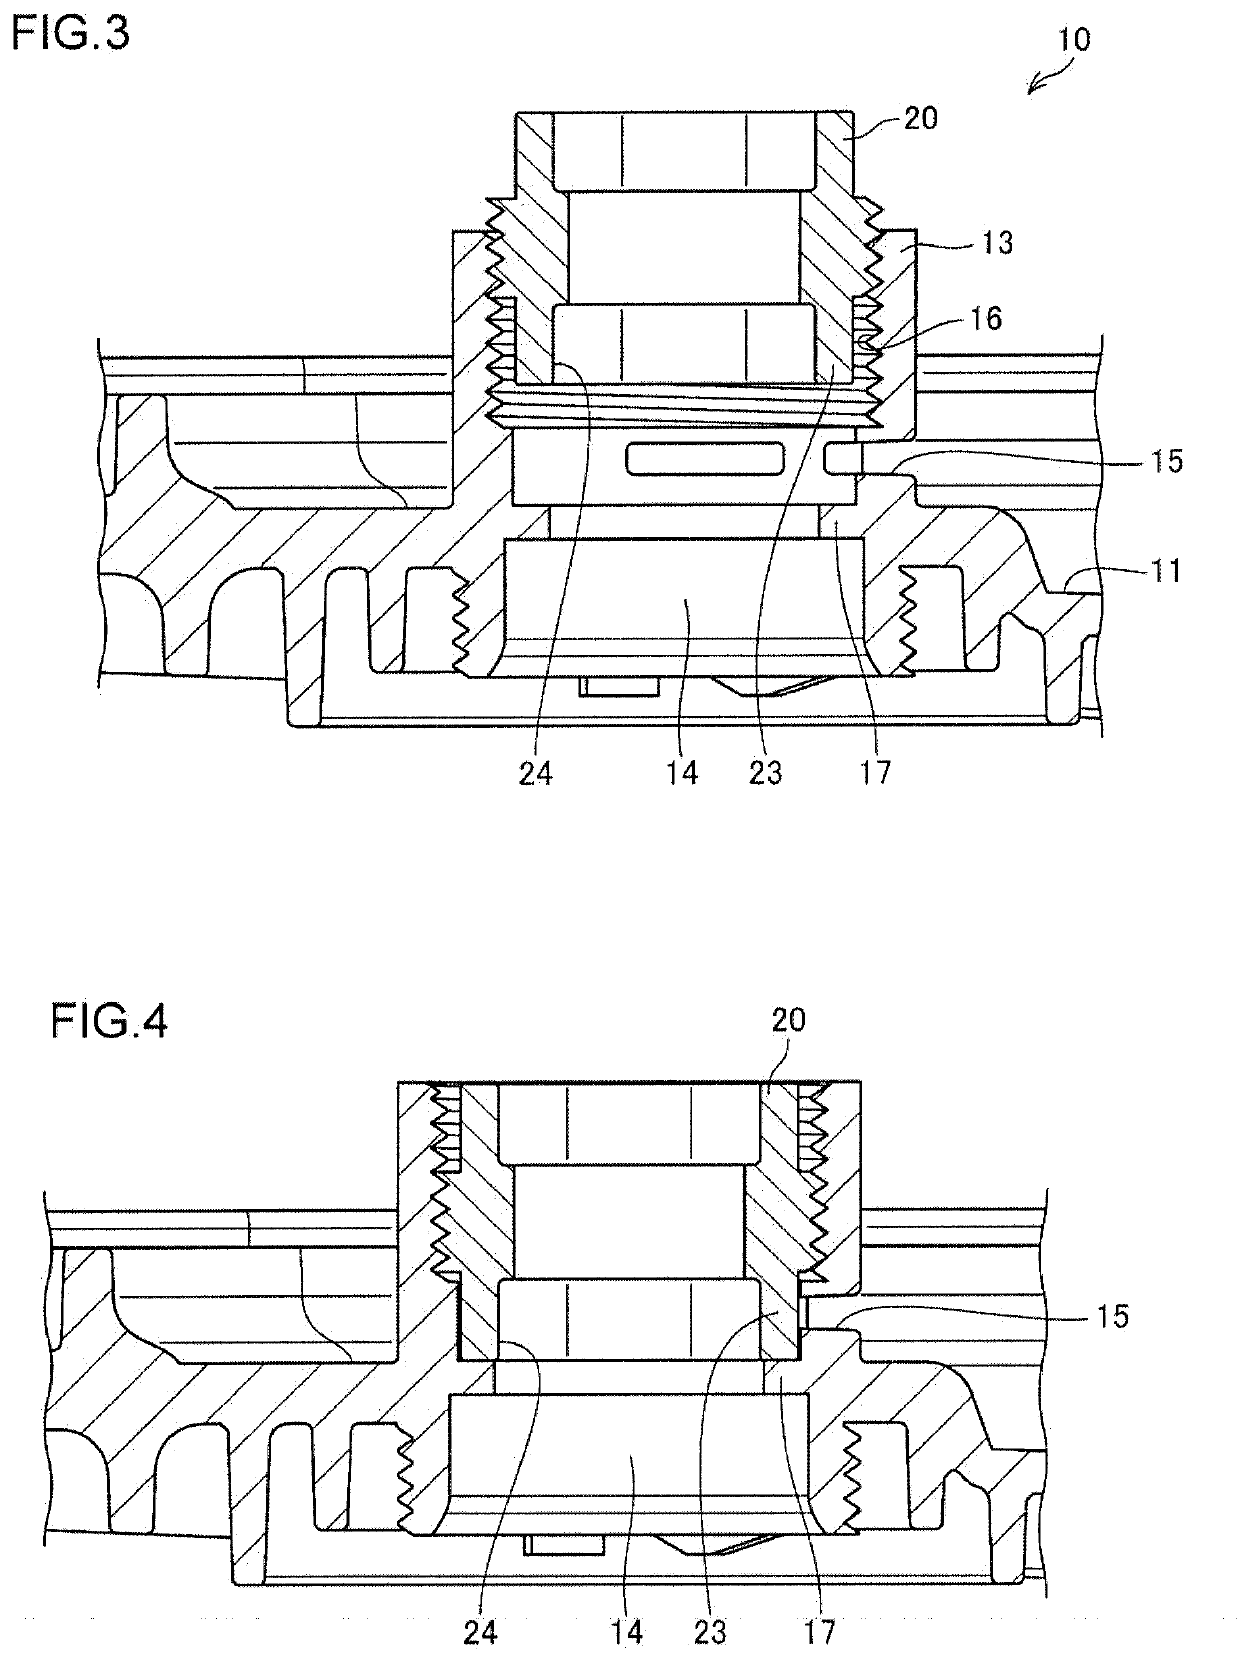 Lubricating oil discharge and filling structure